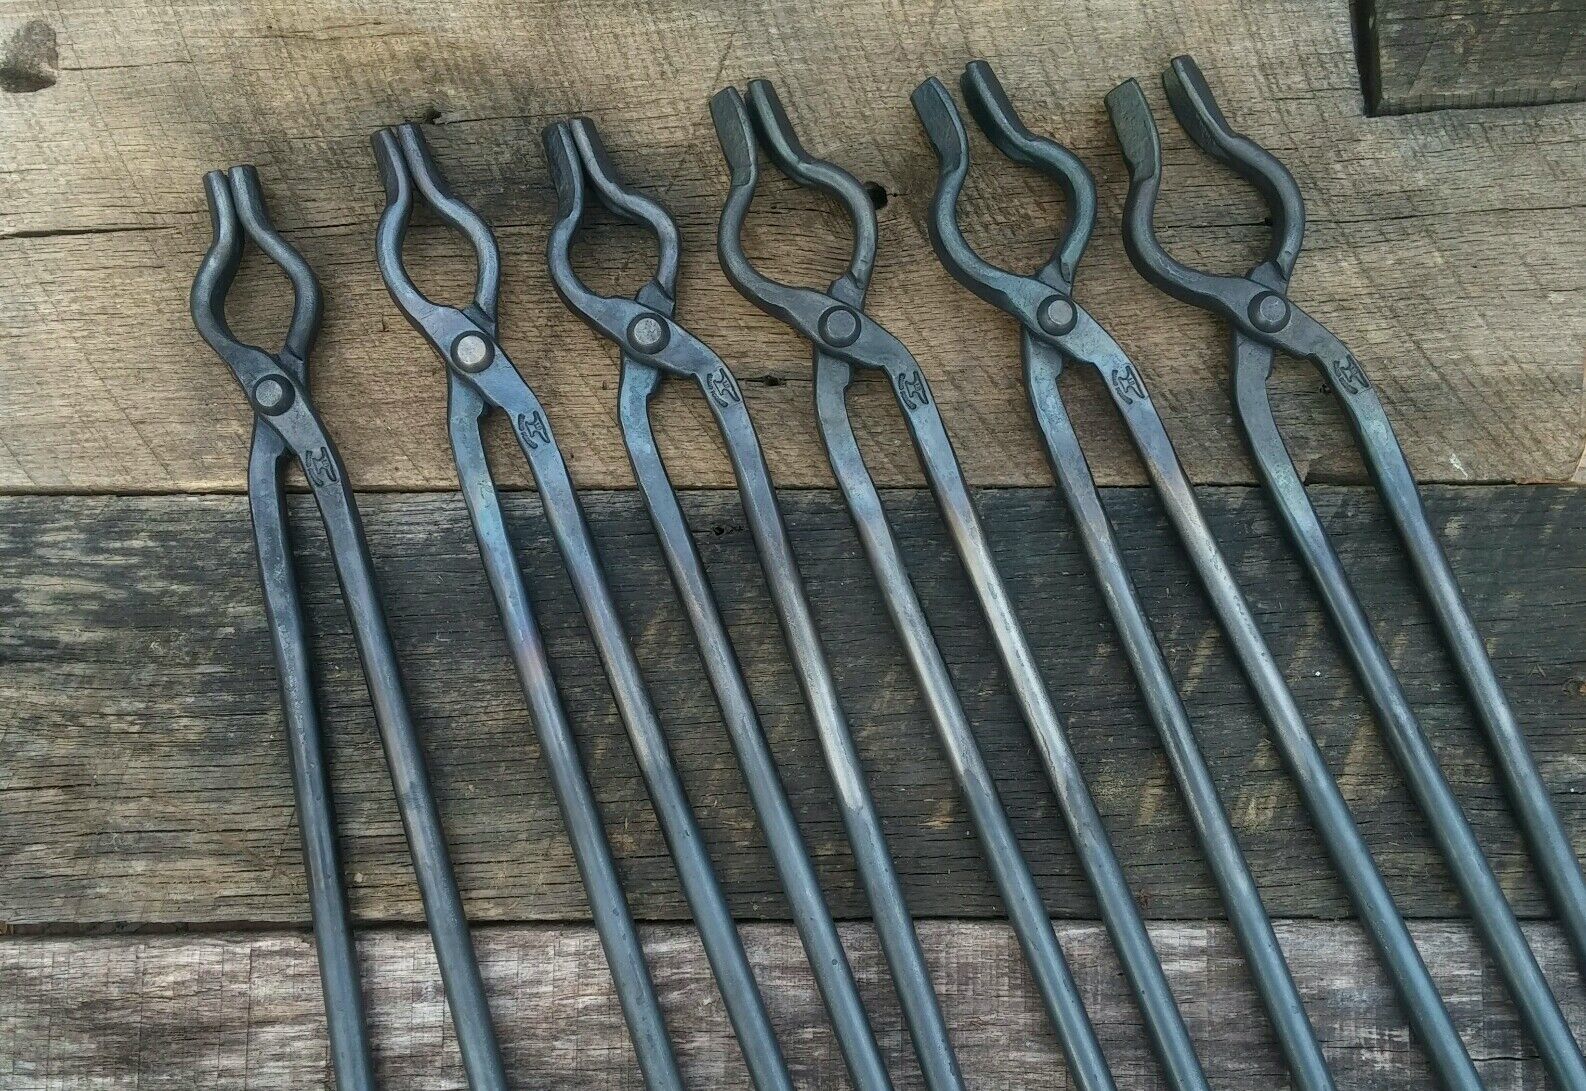 Blacksmith Bolt Tongs Set for anvil hardy vise and forge tools knife making